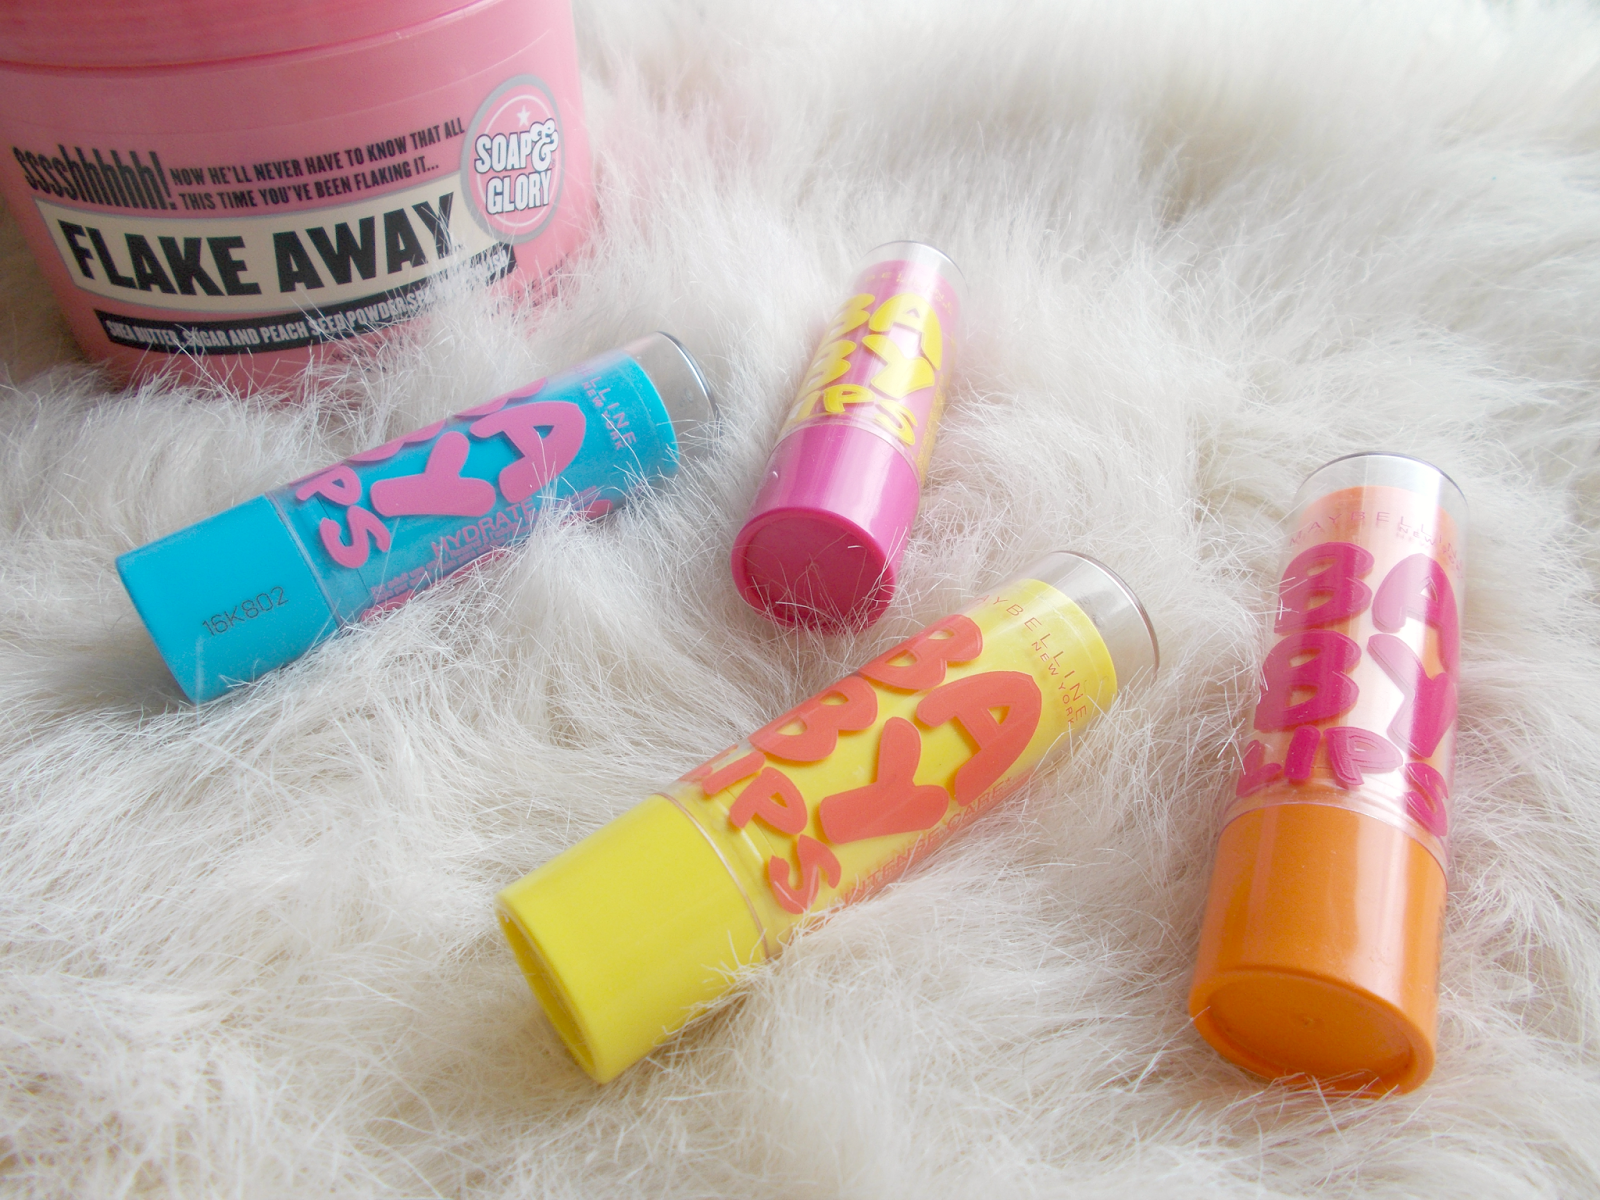 march favourites maybelline baby lips soap & glory flake away scrub